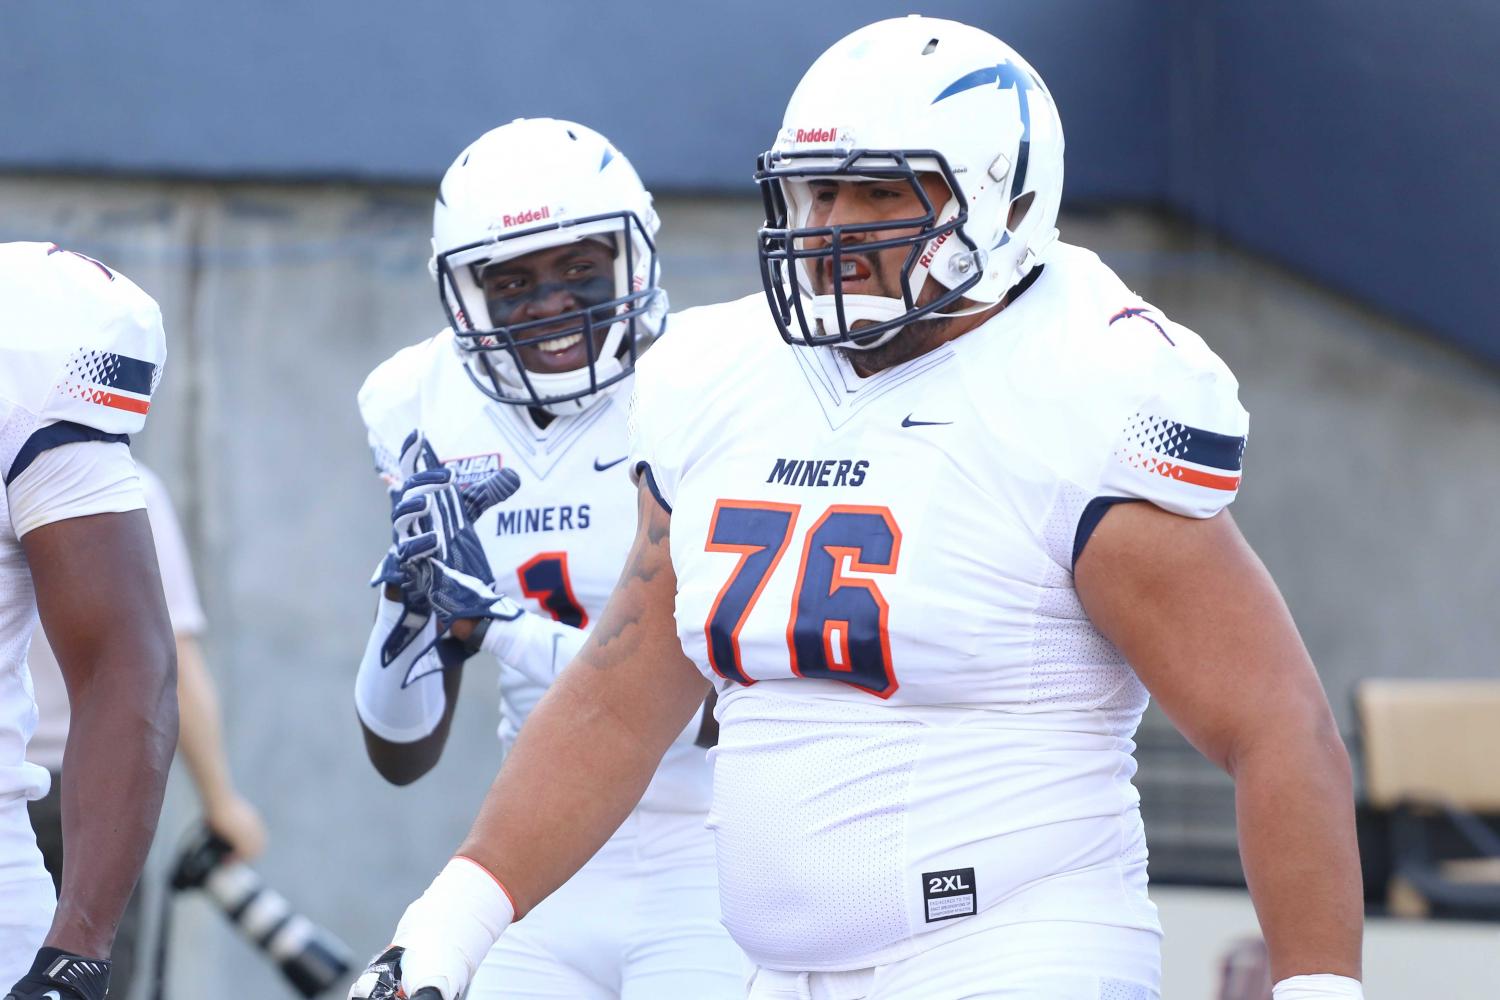 UTEP offensive guard Will Hernandez walks off the field after a drive against Rice on September 9, 2017 at the Sun Bowl.